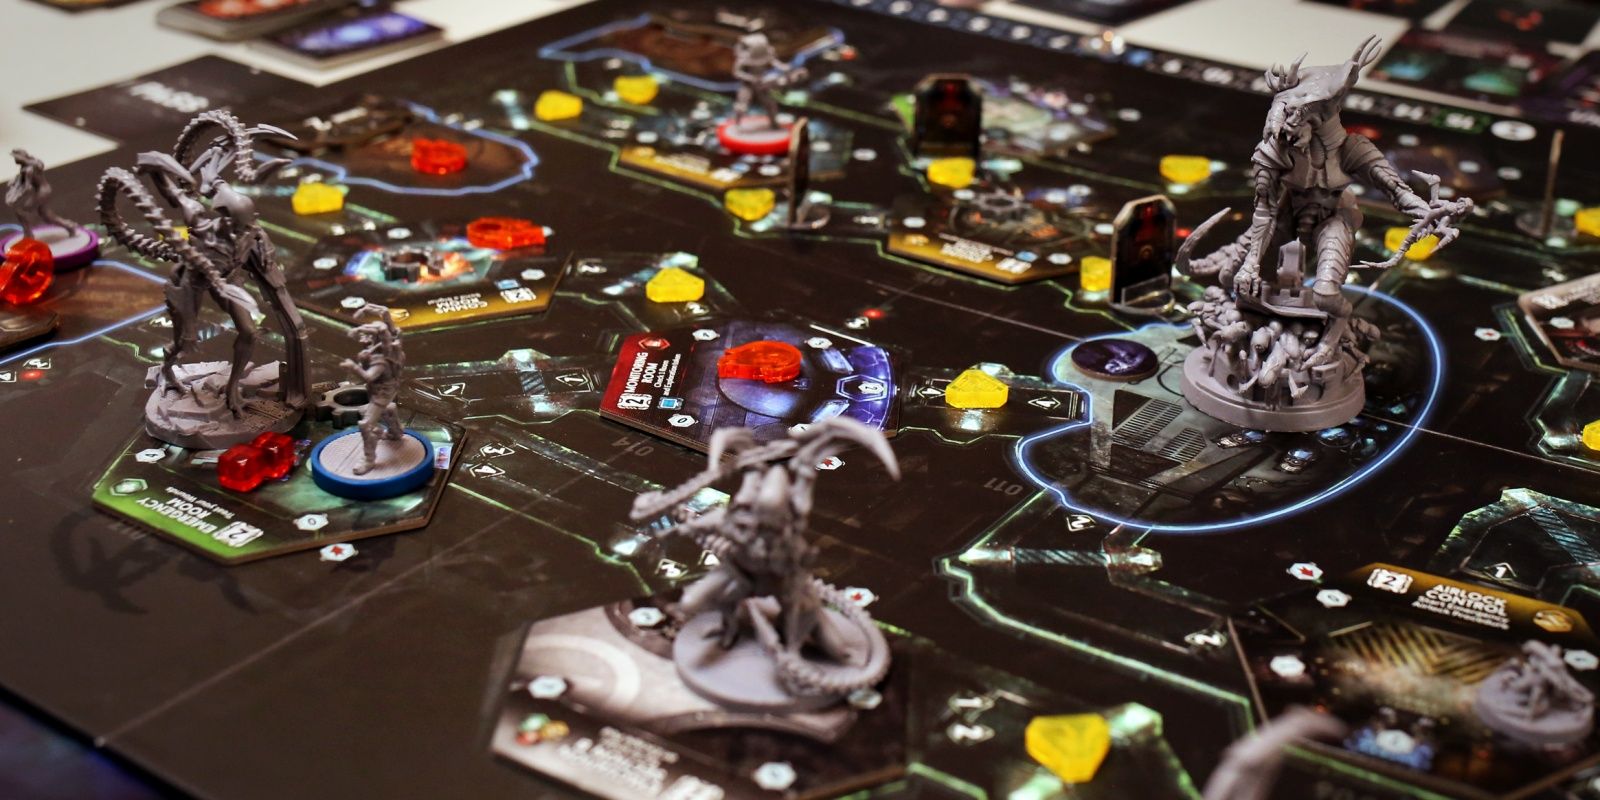 Nemesis Board Game Being Played On The Table